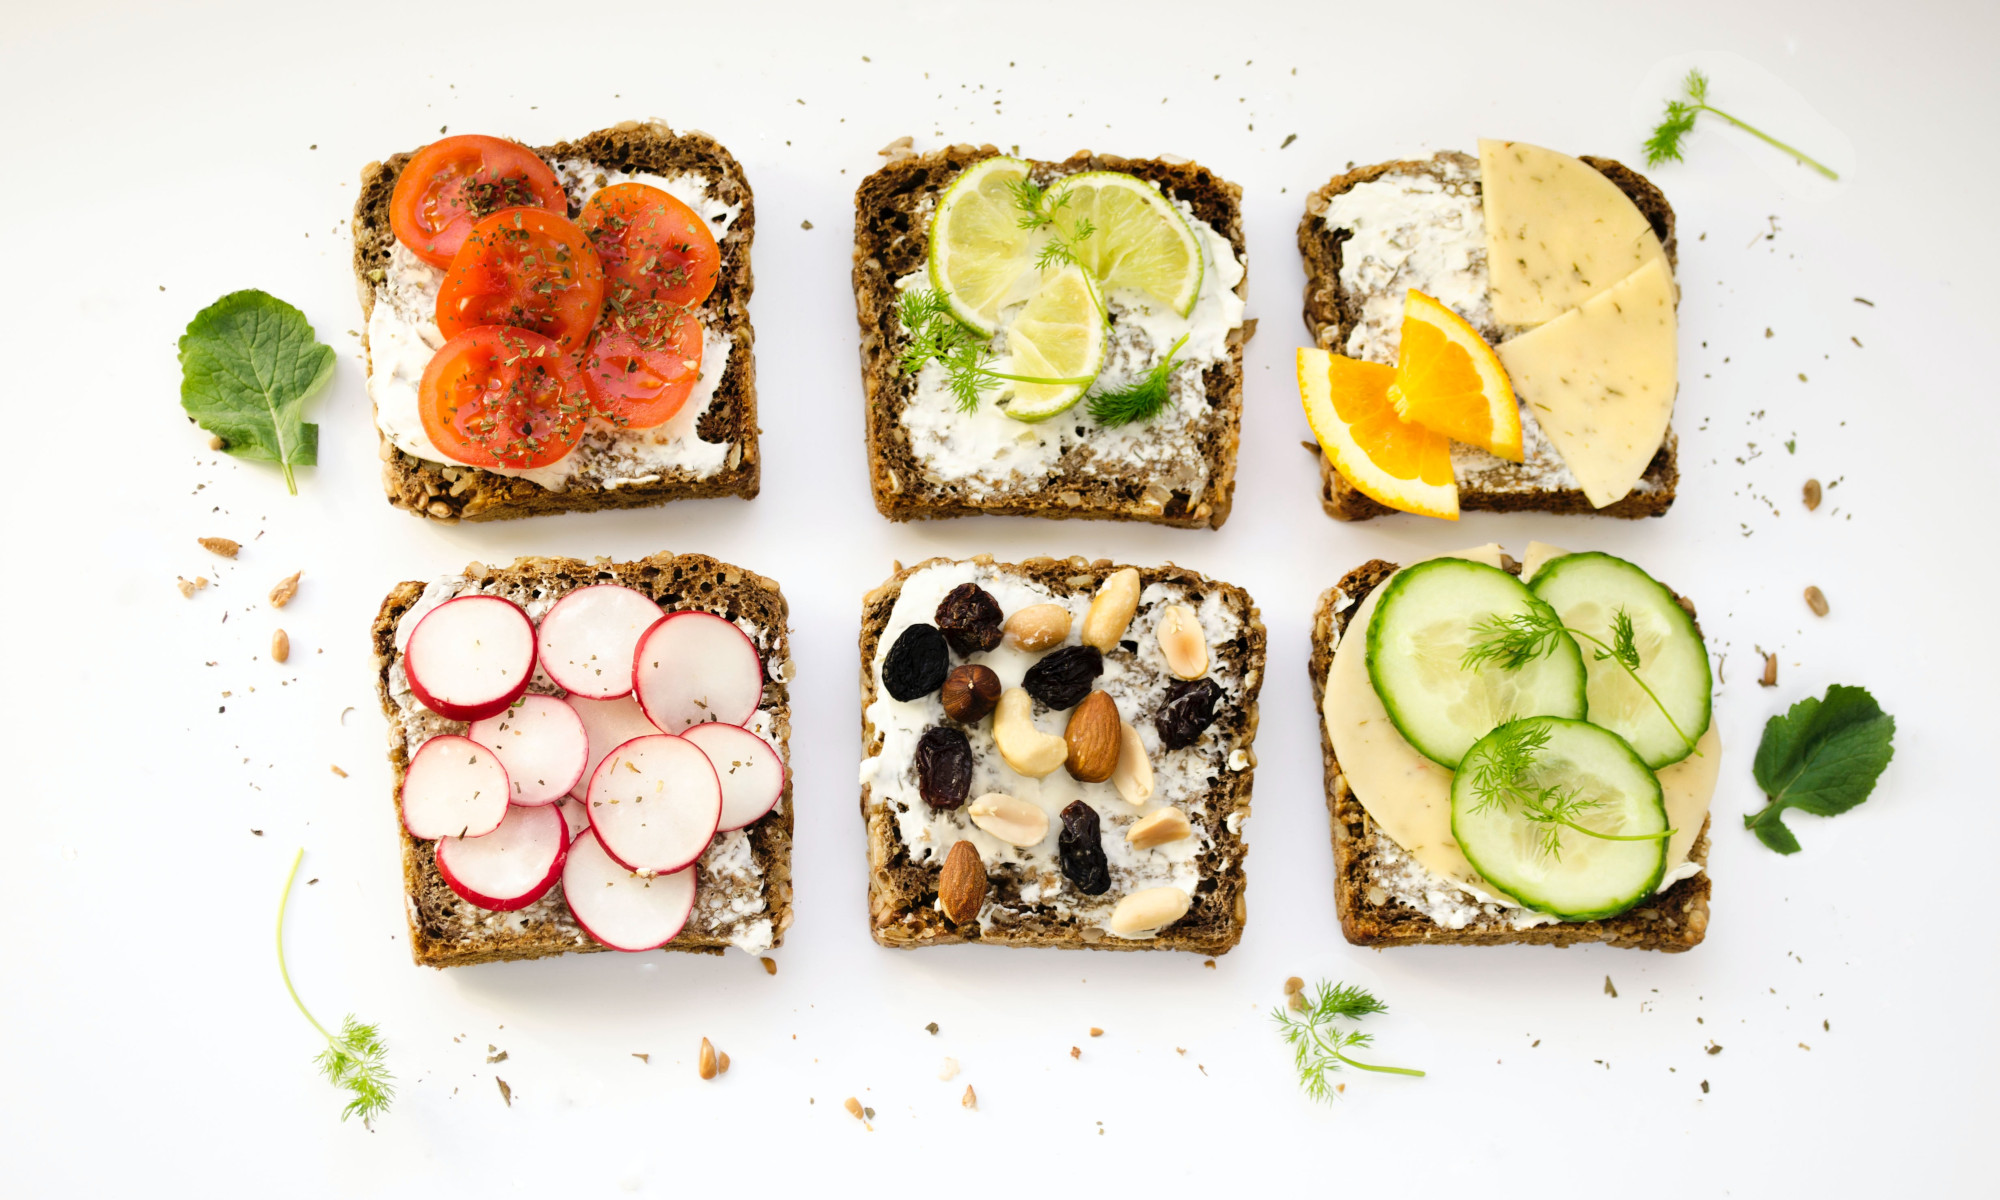 Image of six open face sandwiches